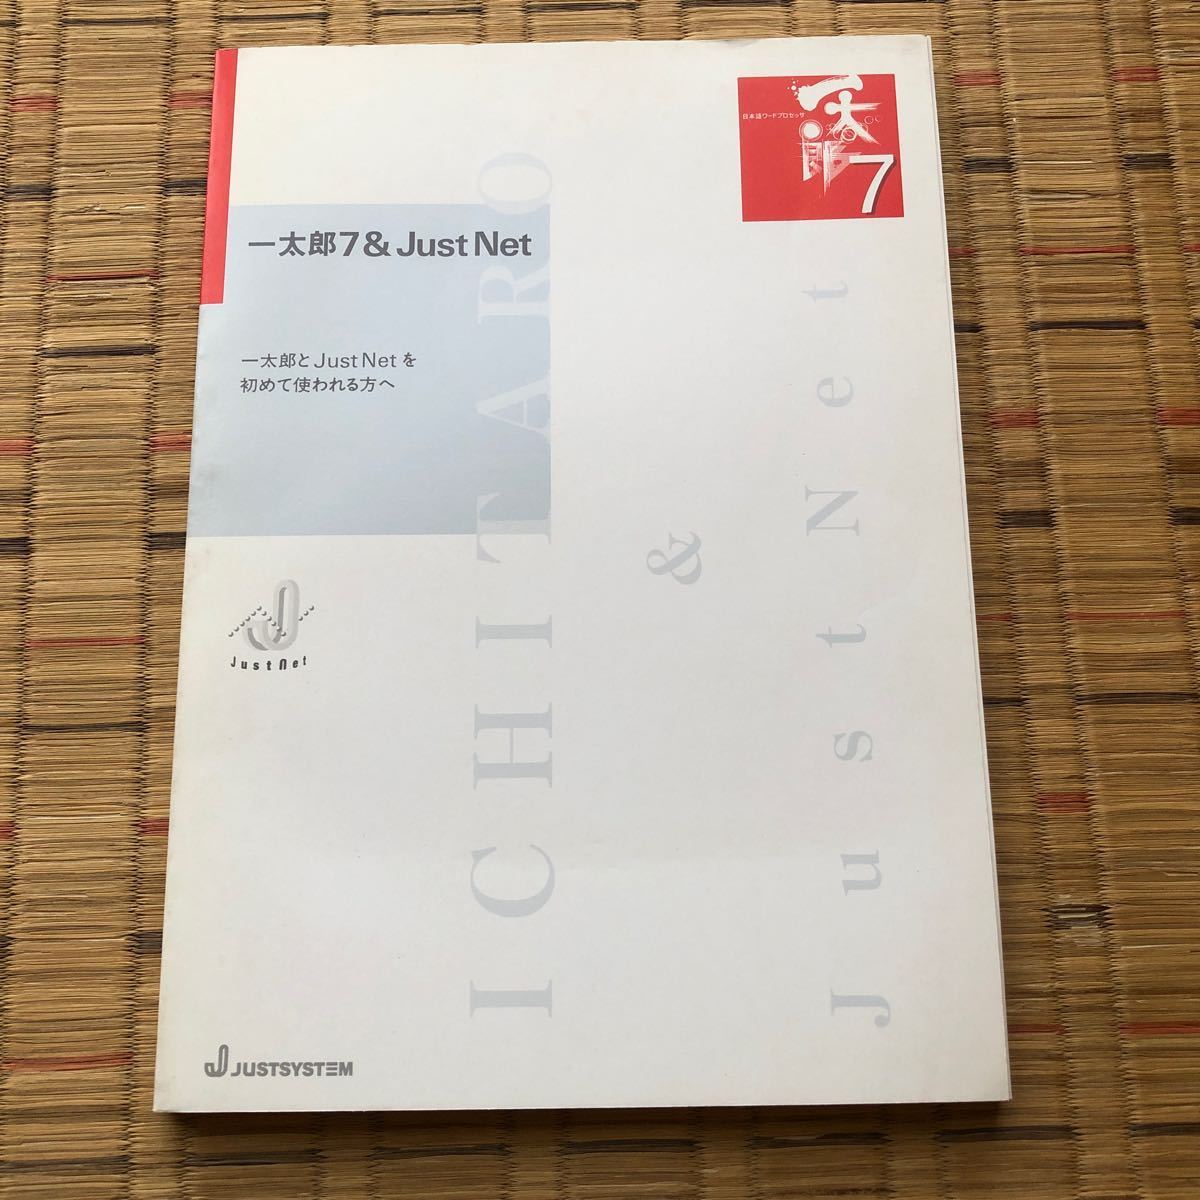  one Taro 7 & Just Net owner manual 1997 year 1 month issue one Taro .Just Net. for the first time is used . person .